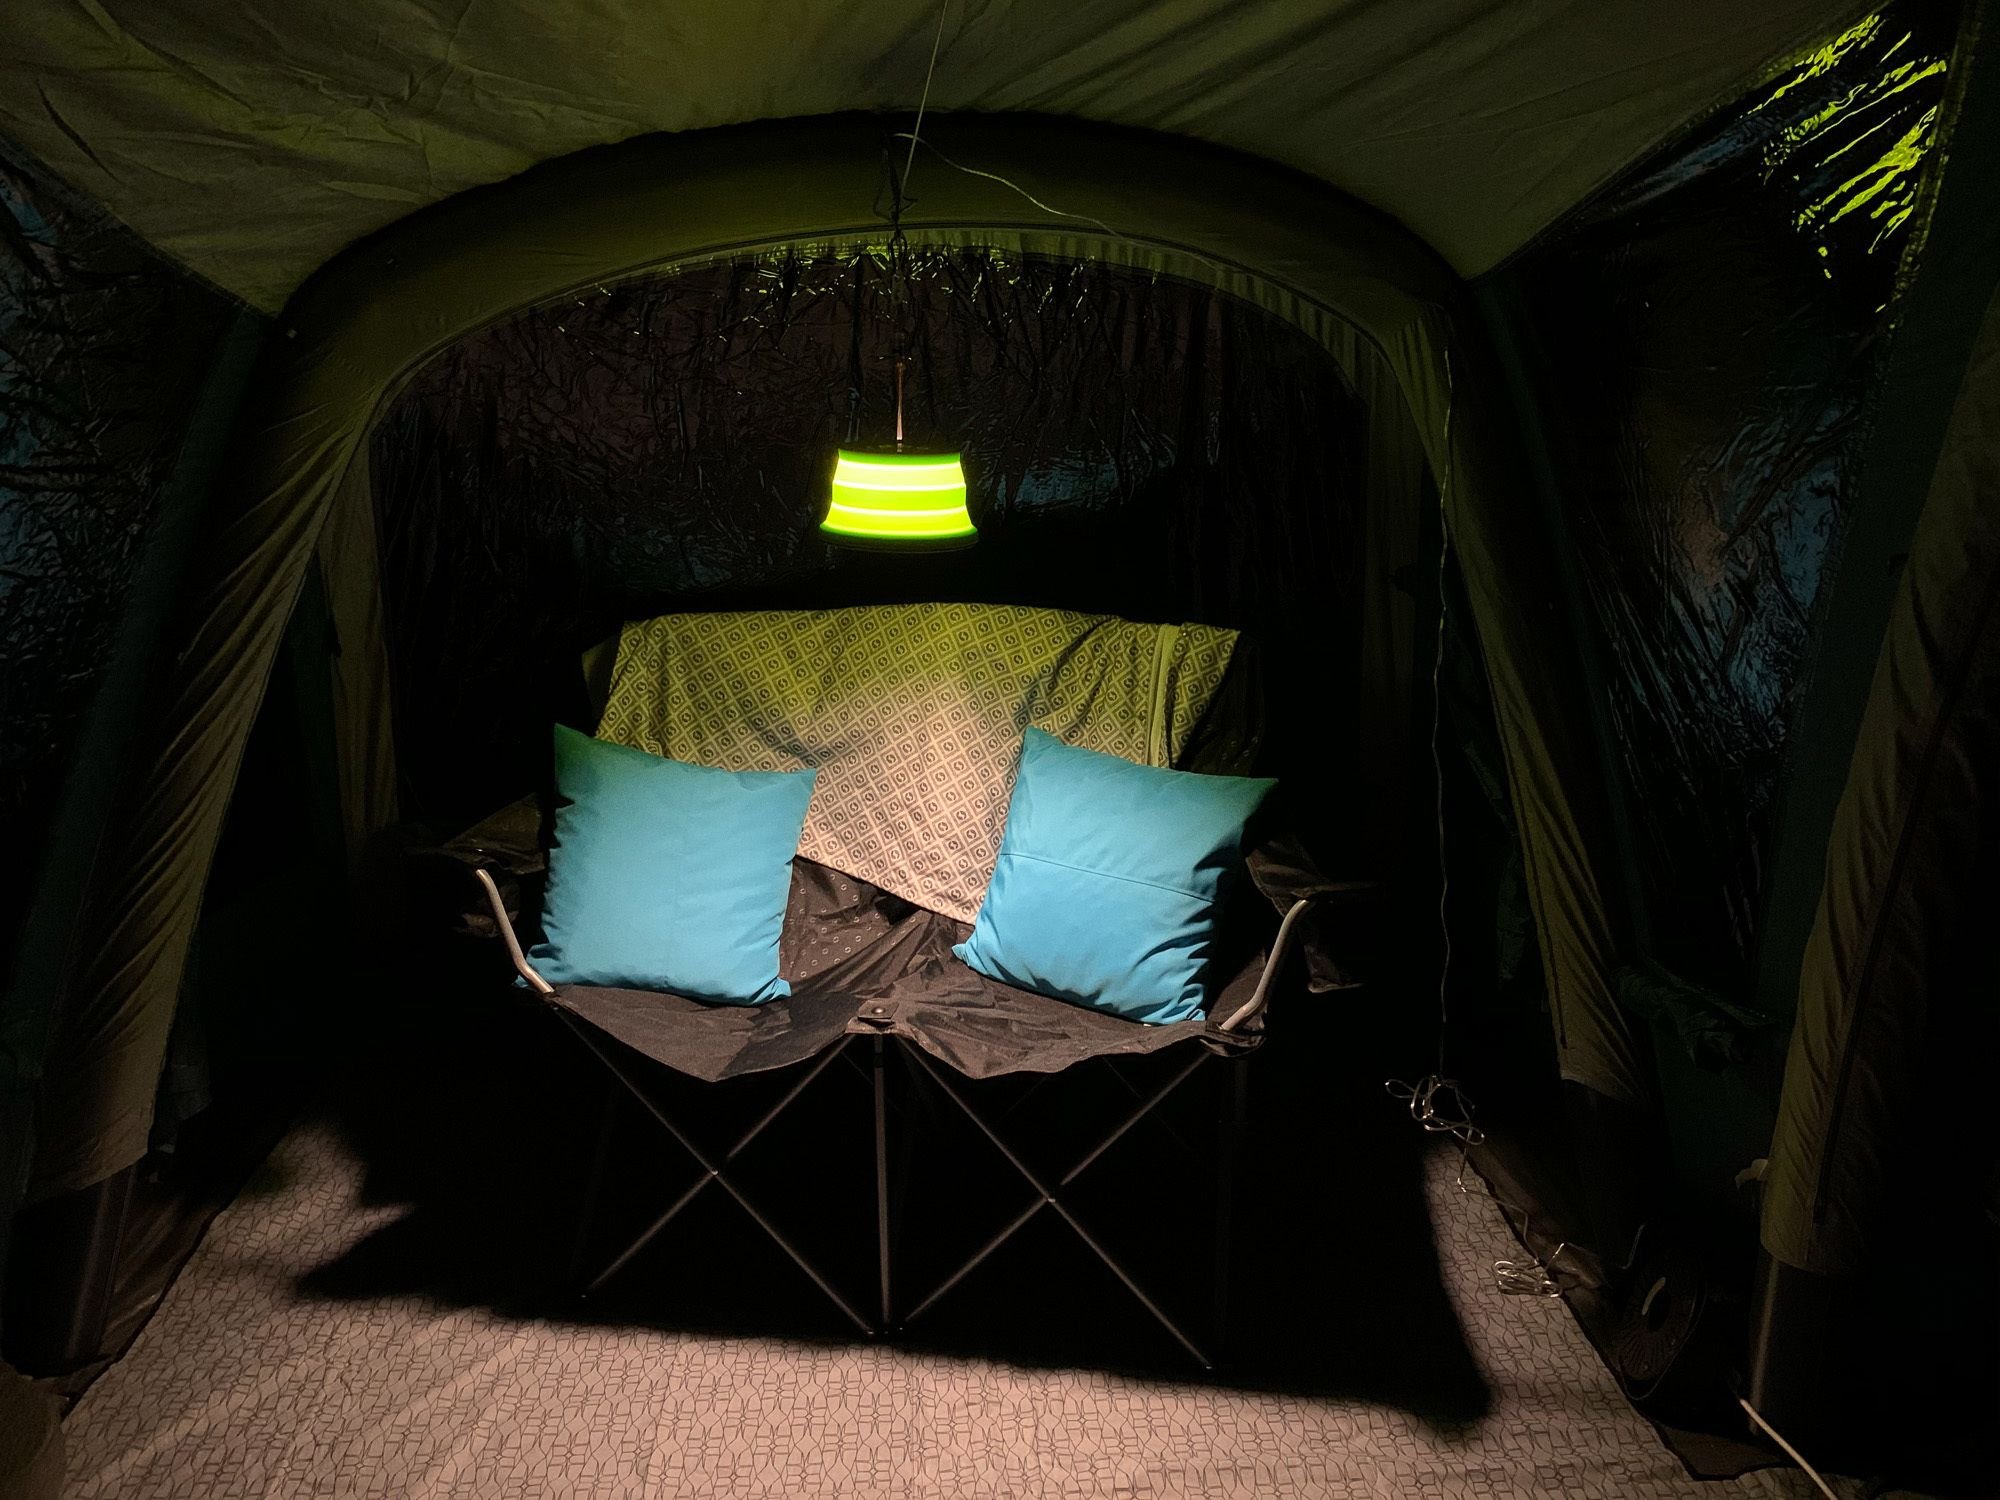 The chair in the tent at night